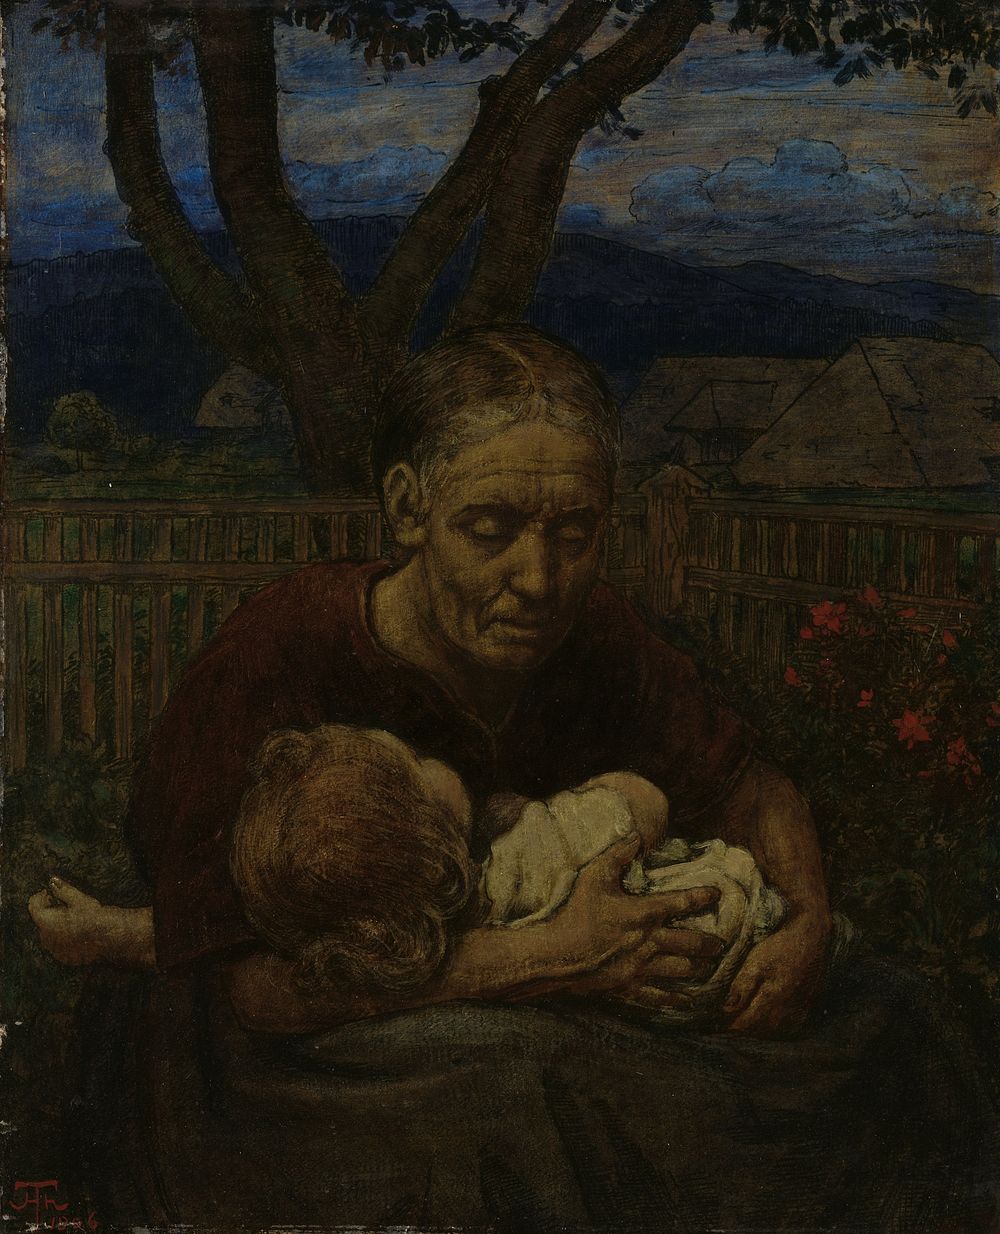 Mother and Child in a garden (1850 - 1924) by Hans Thoma